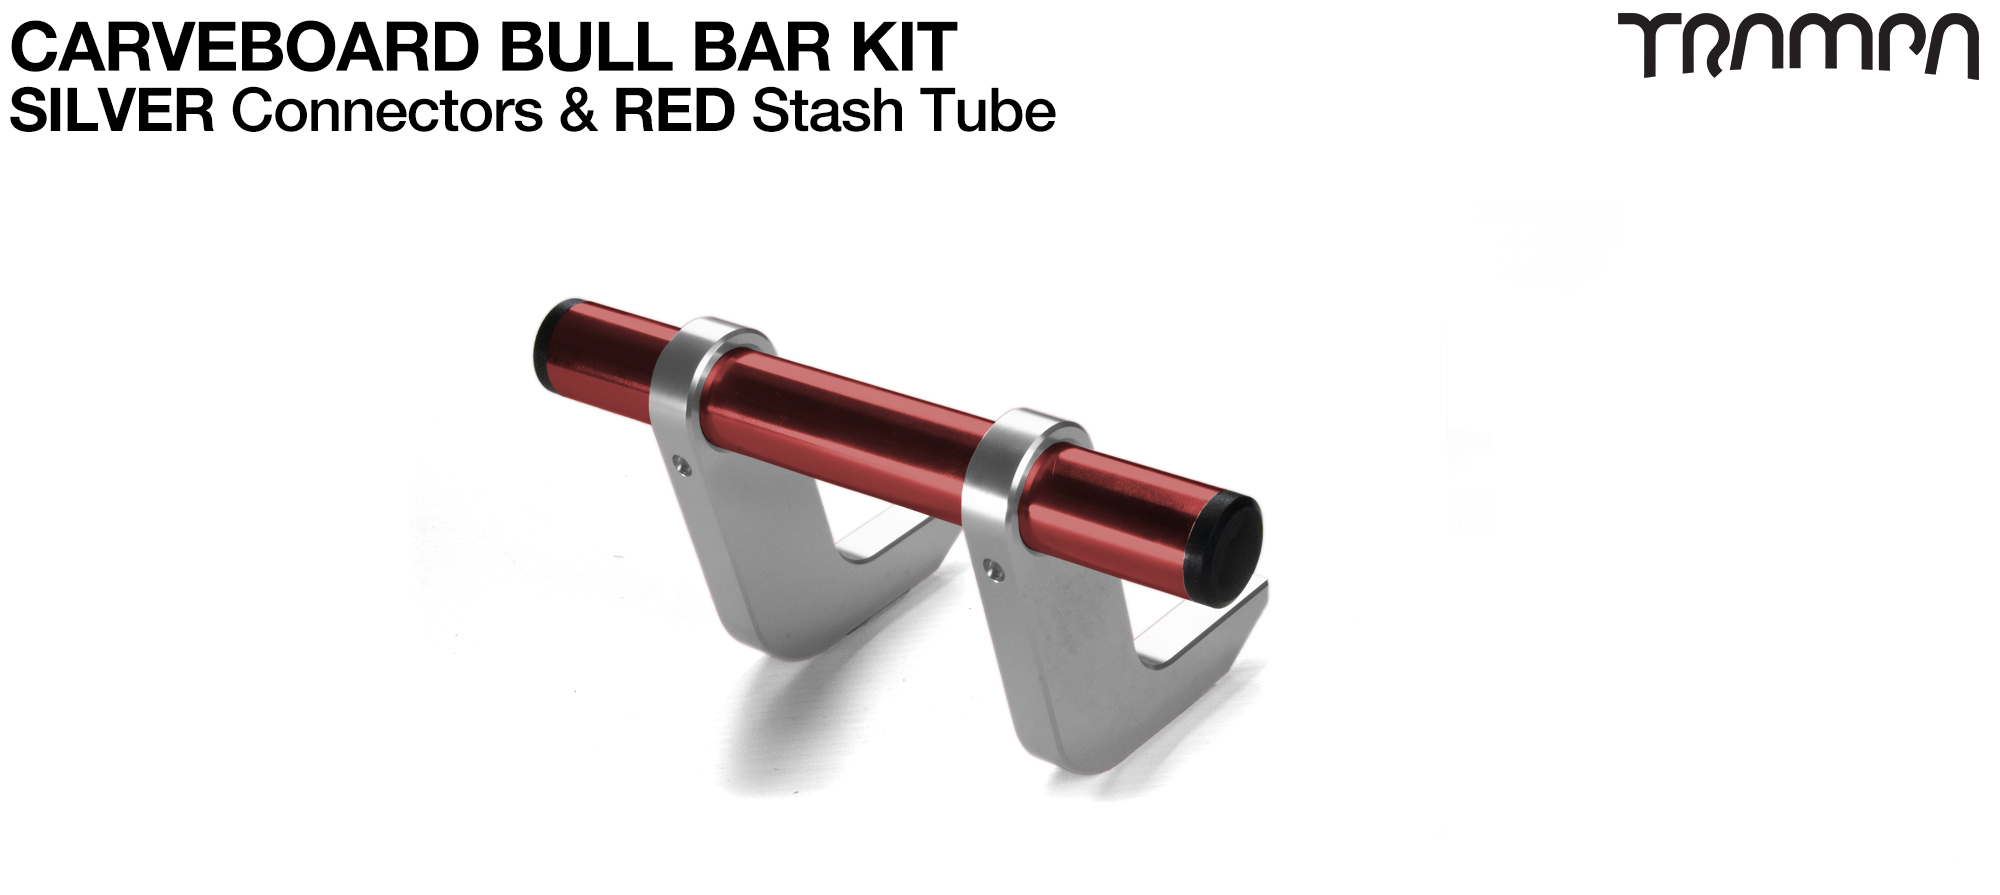 SILVER Uprights & RED Crossbar BULL BARS for CARVE BOARDS using T6 Heat Treated CNC'd Aluminum Clamps, Hollow Aluminium Stash Tubes with Rubber end bungs  